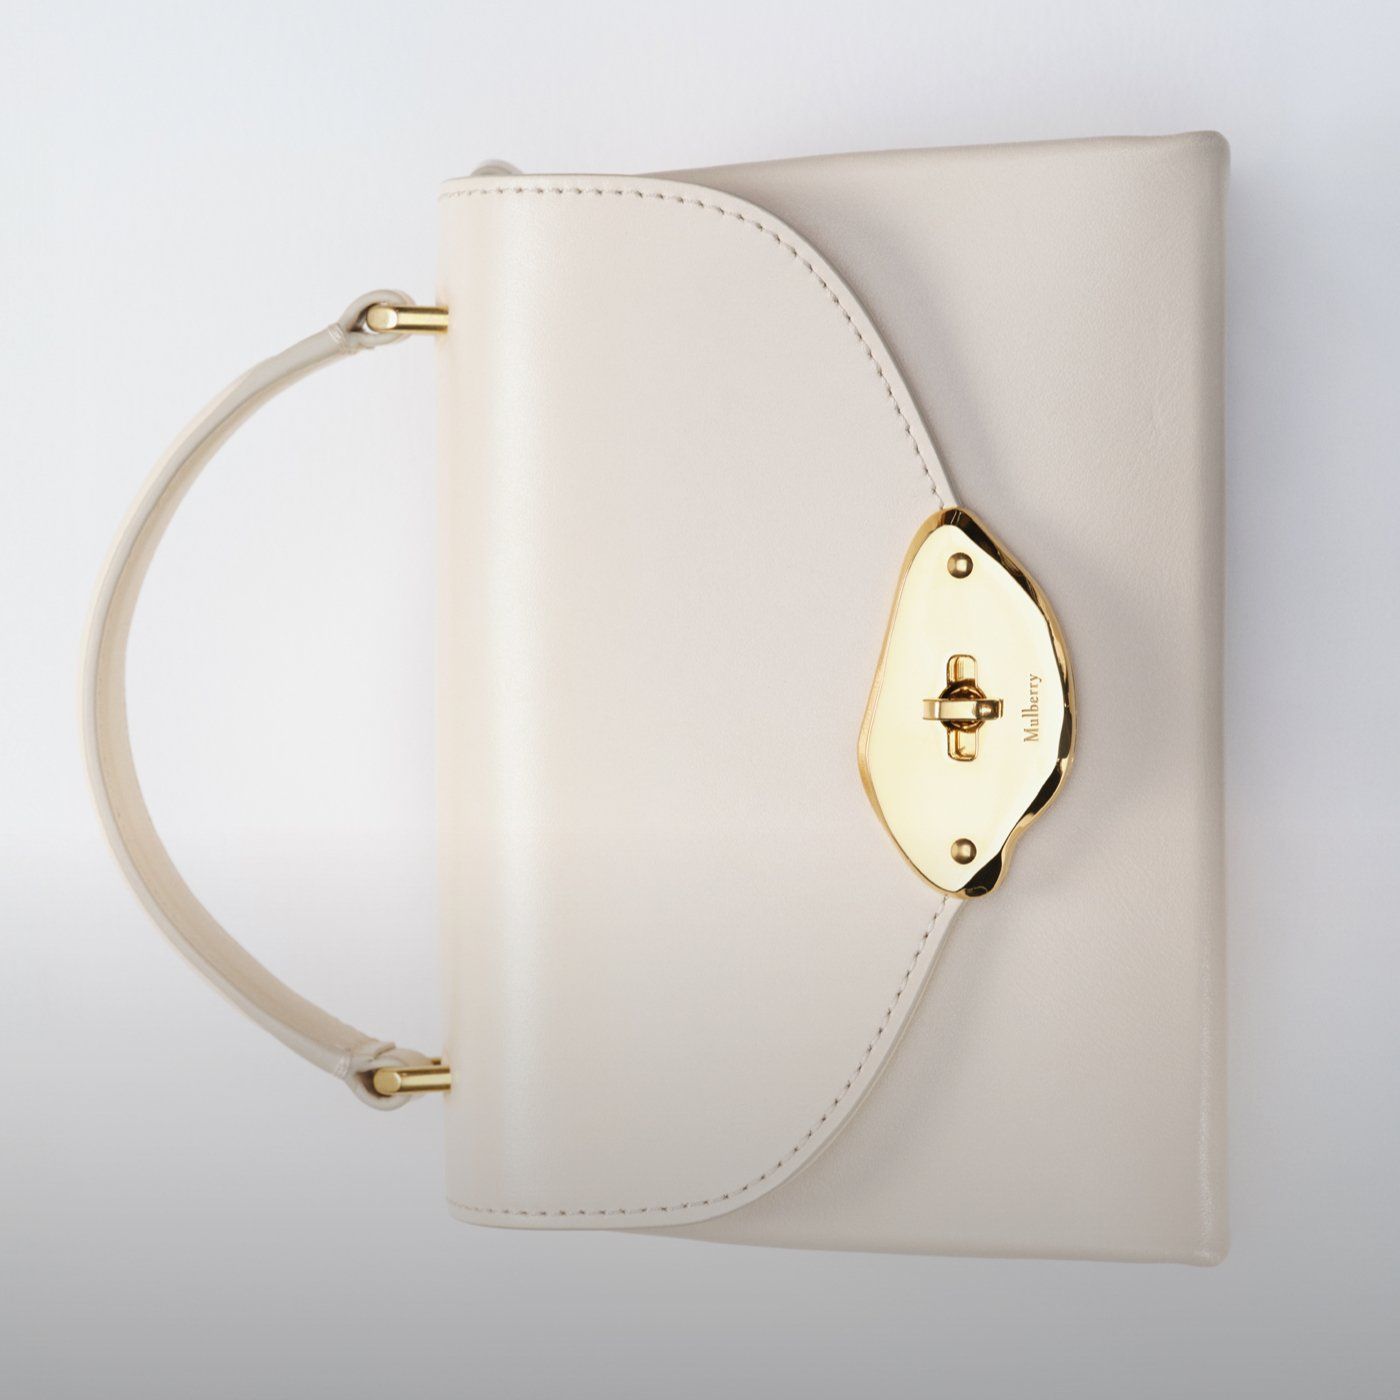 Mulberry Small Lana Top Handle bag in Eggshell